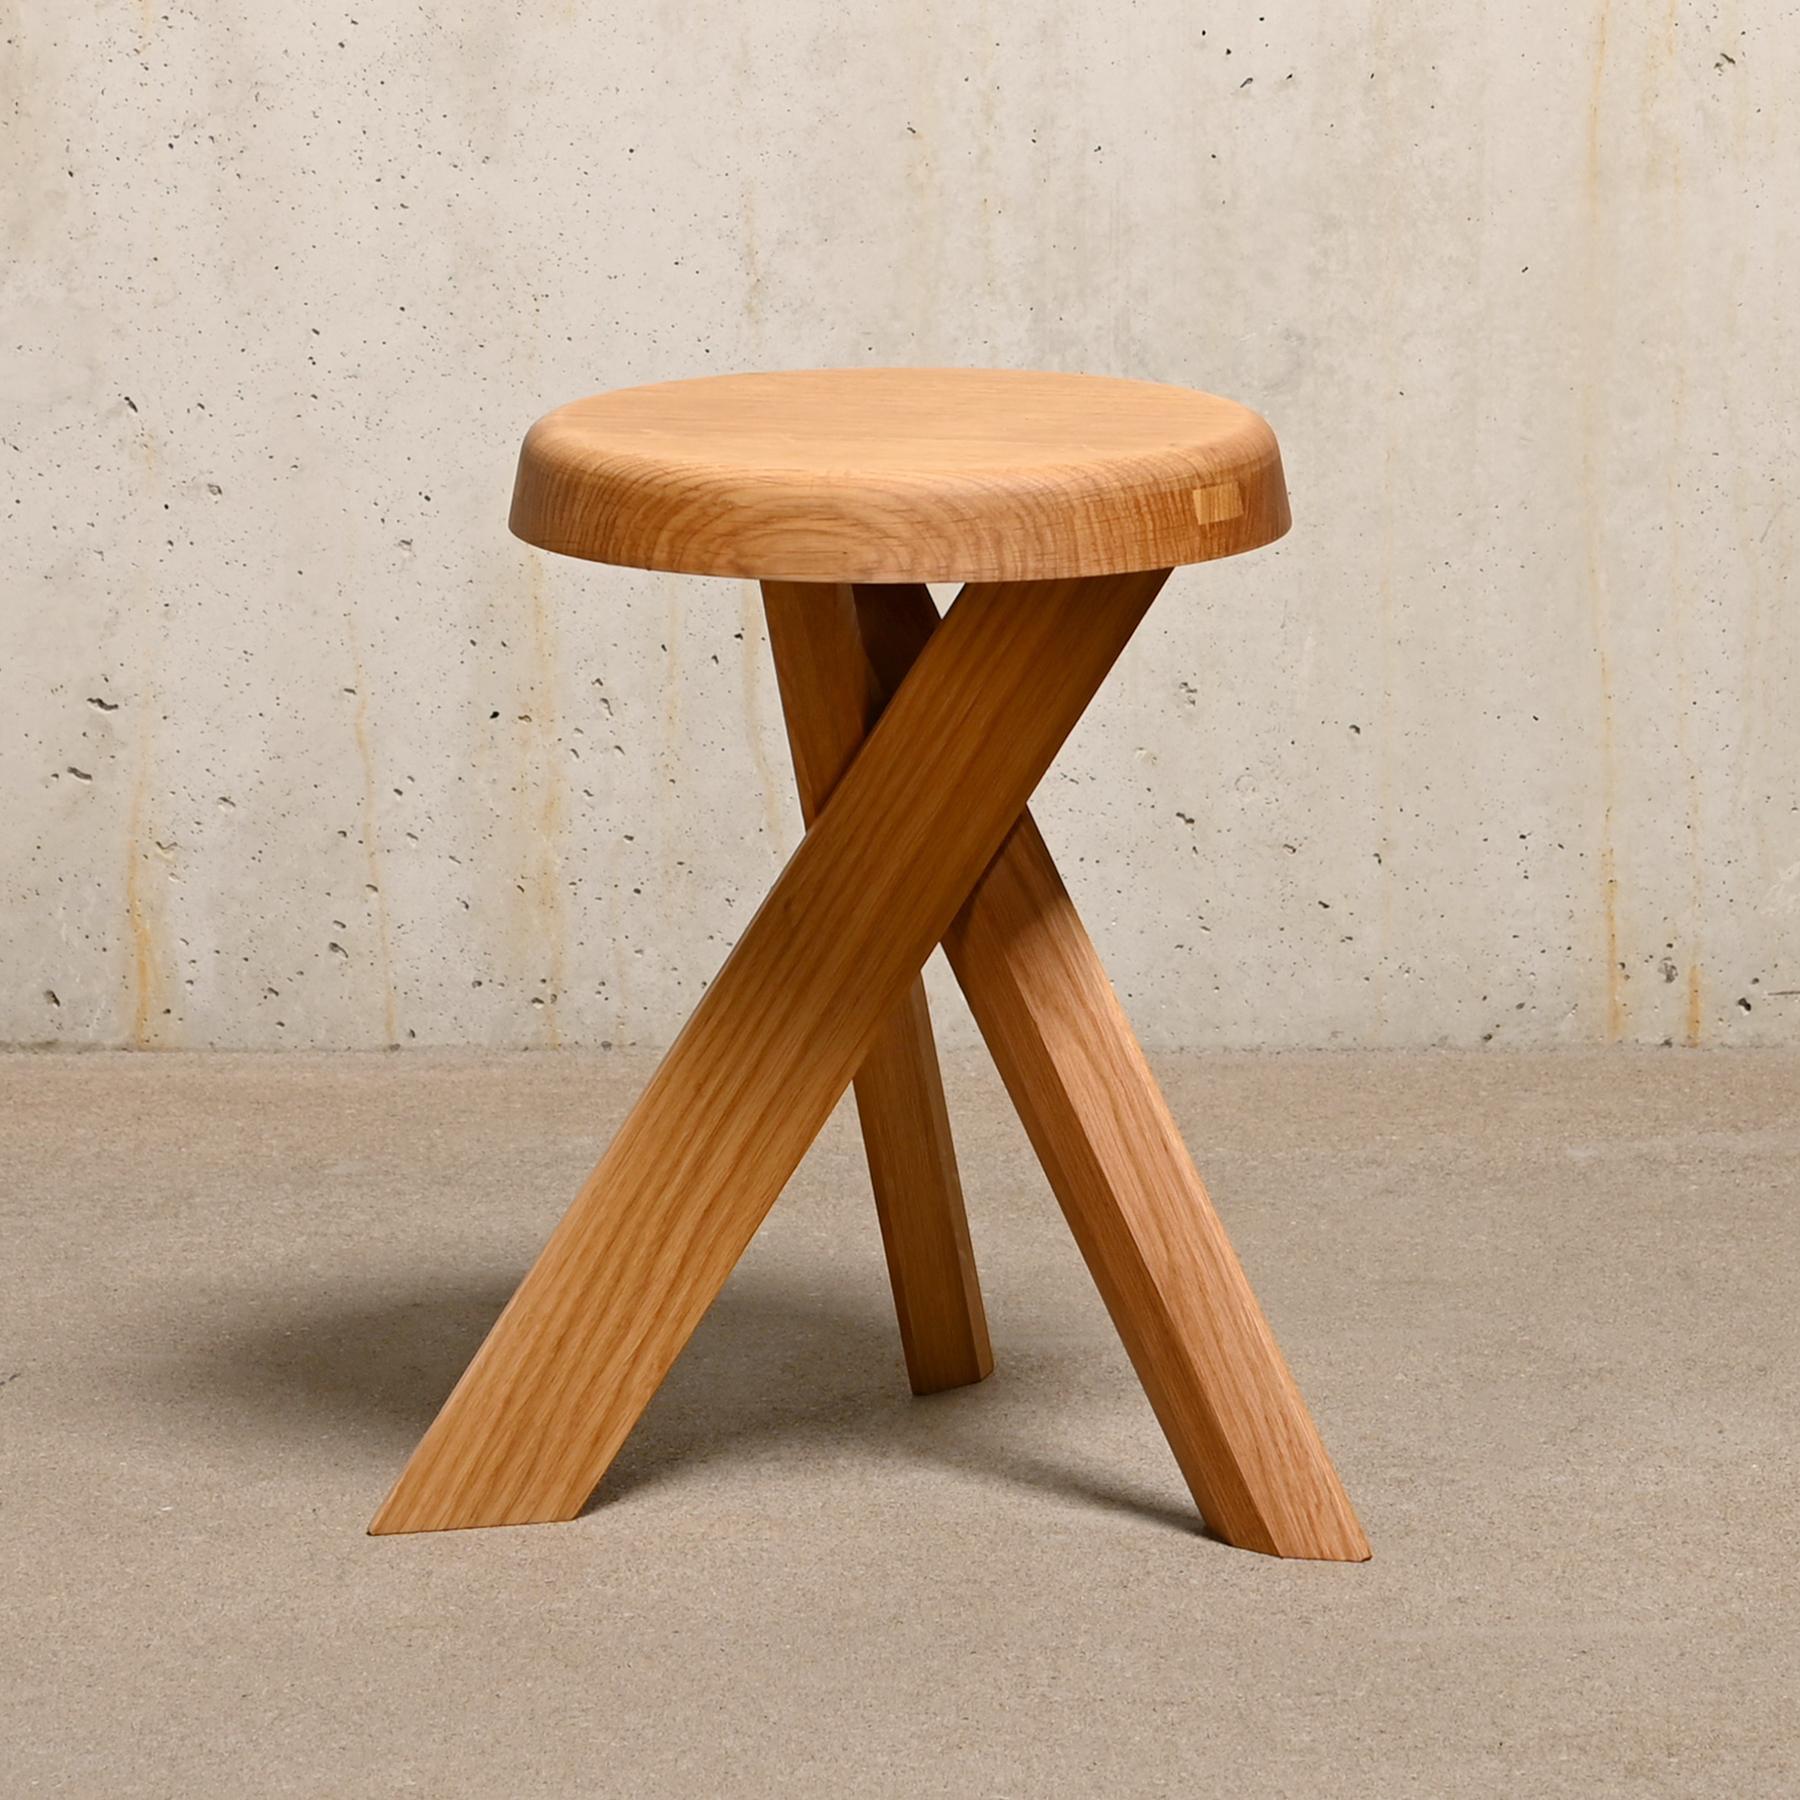 Mid-Century Modern Pierre Chapo Stool S31A in Solid Oak by Chapo Creation, France